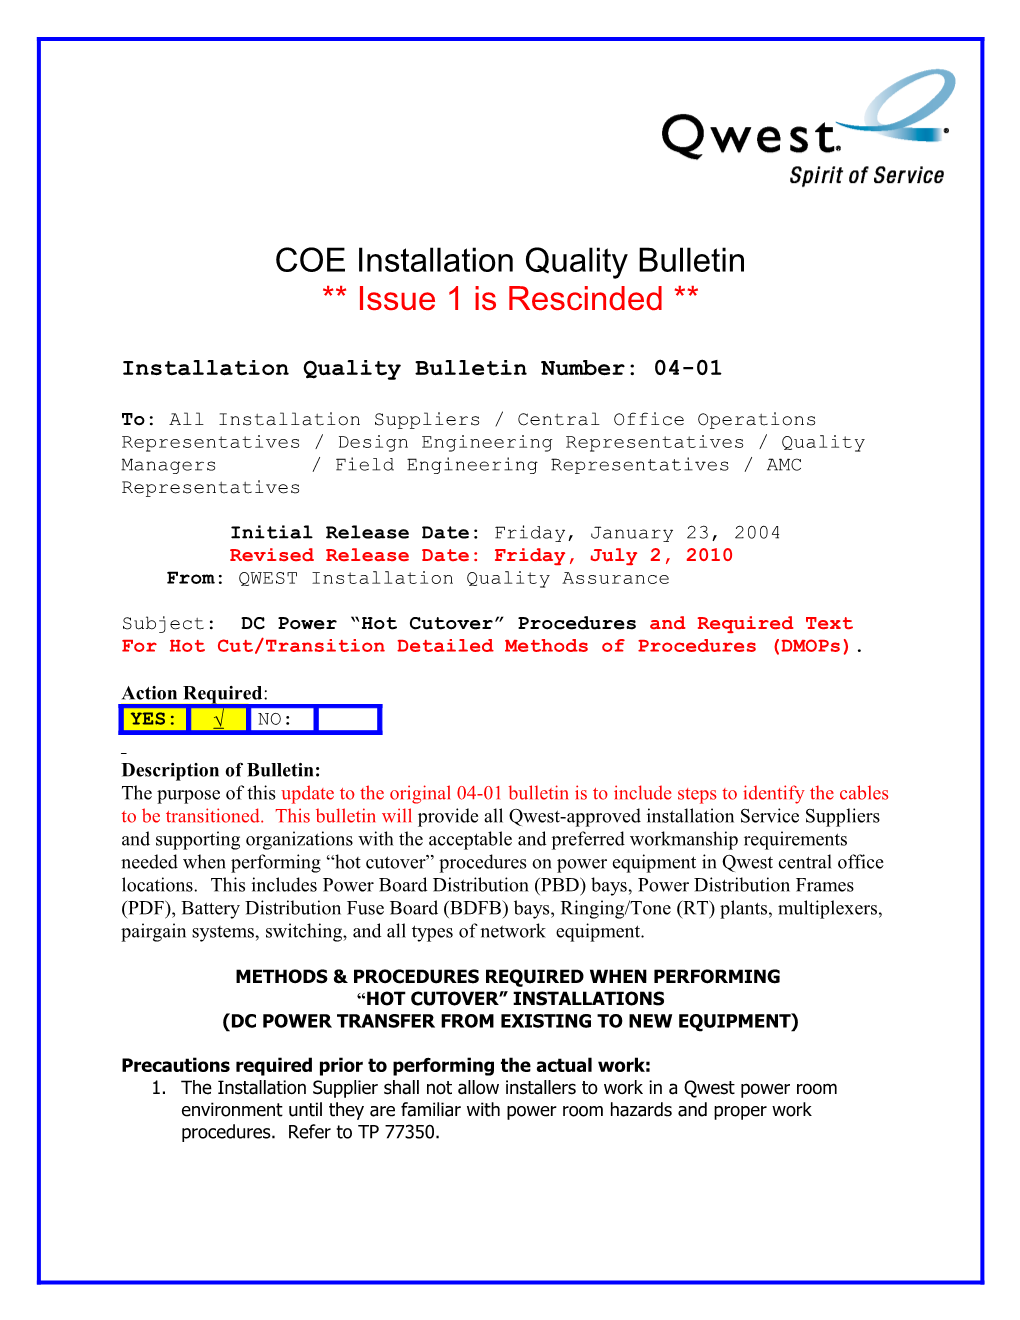 Installation Quality Bulletin Number: 04-01